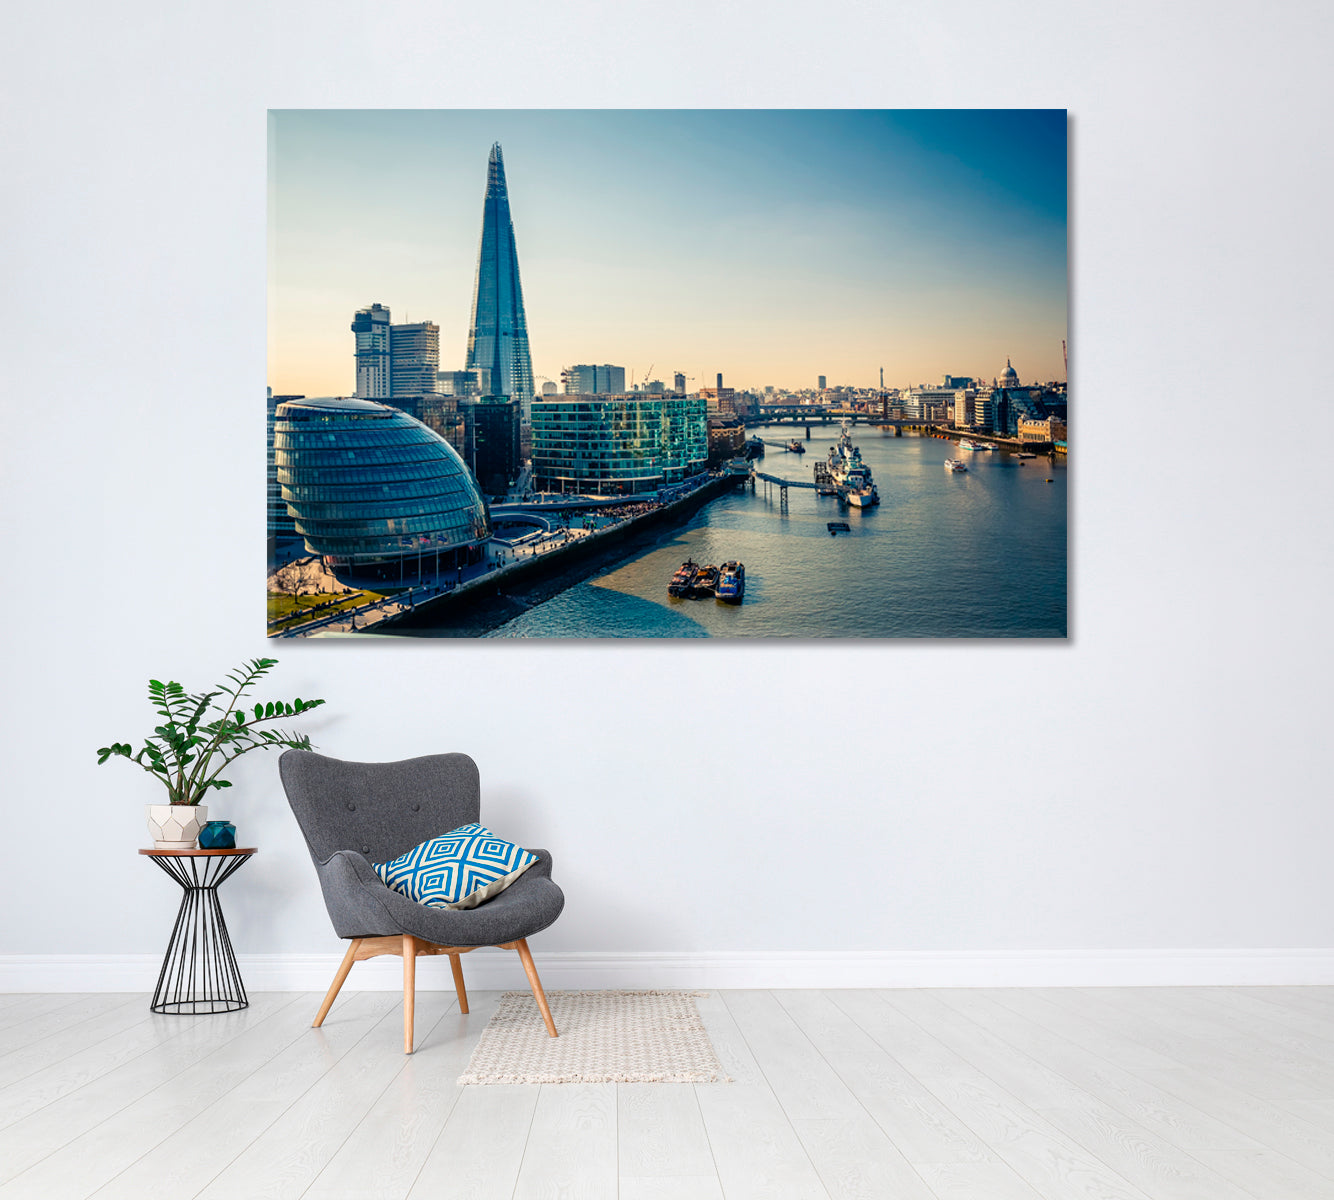 London City Skyline with River Thames Canvas Print ArtLexy 1 Panel 24"x16" inches 